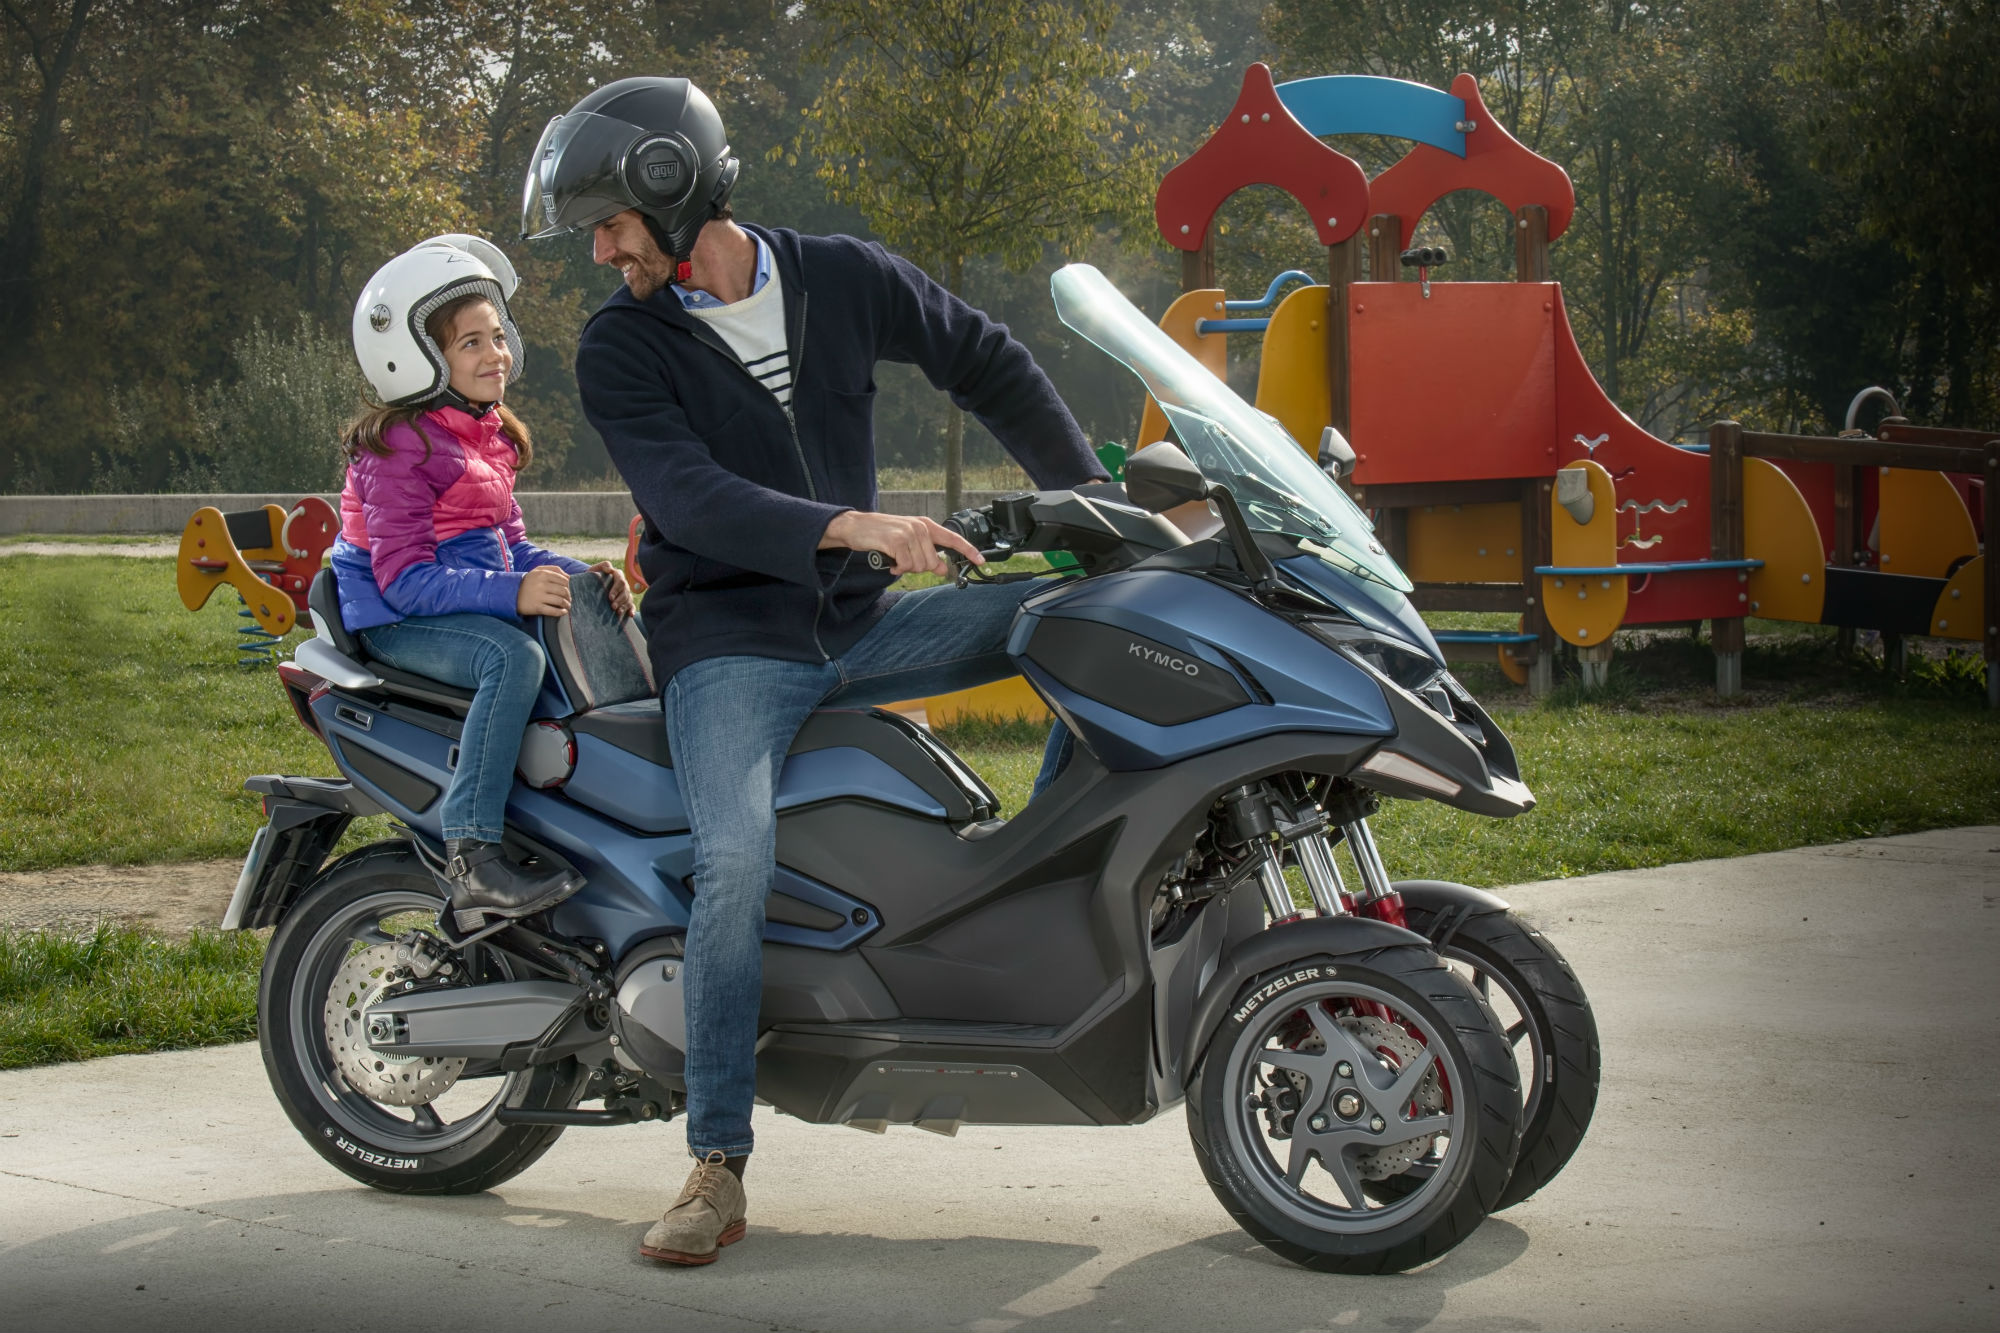 Kymco reveals two-and-three-wheel ‘Adventure’ scooter concepts at Eicma